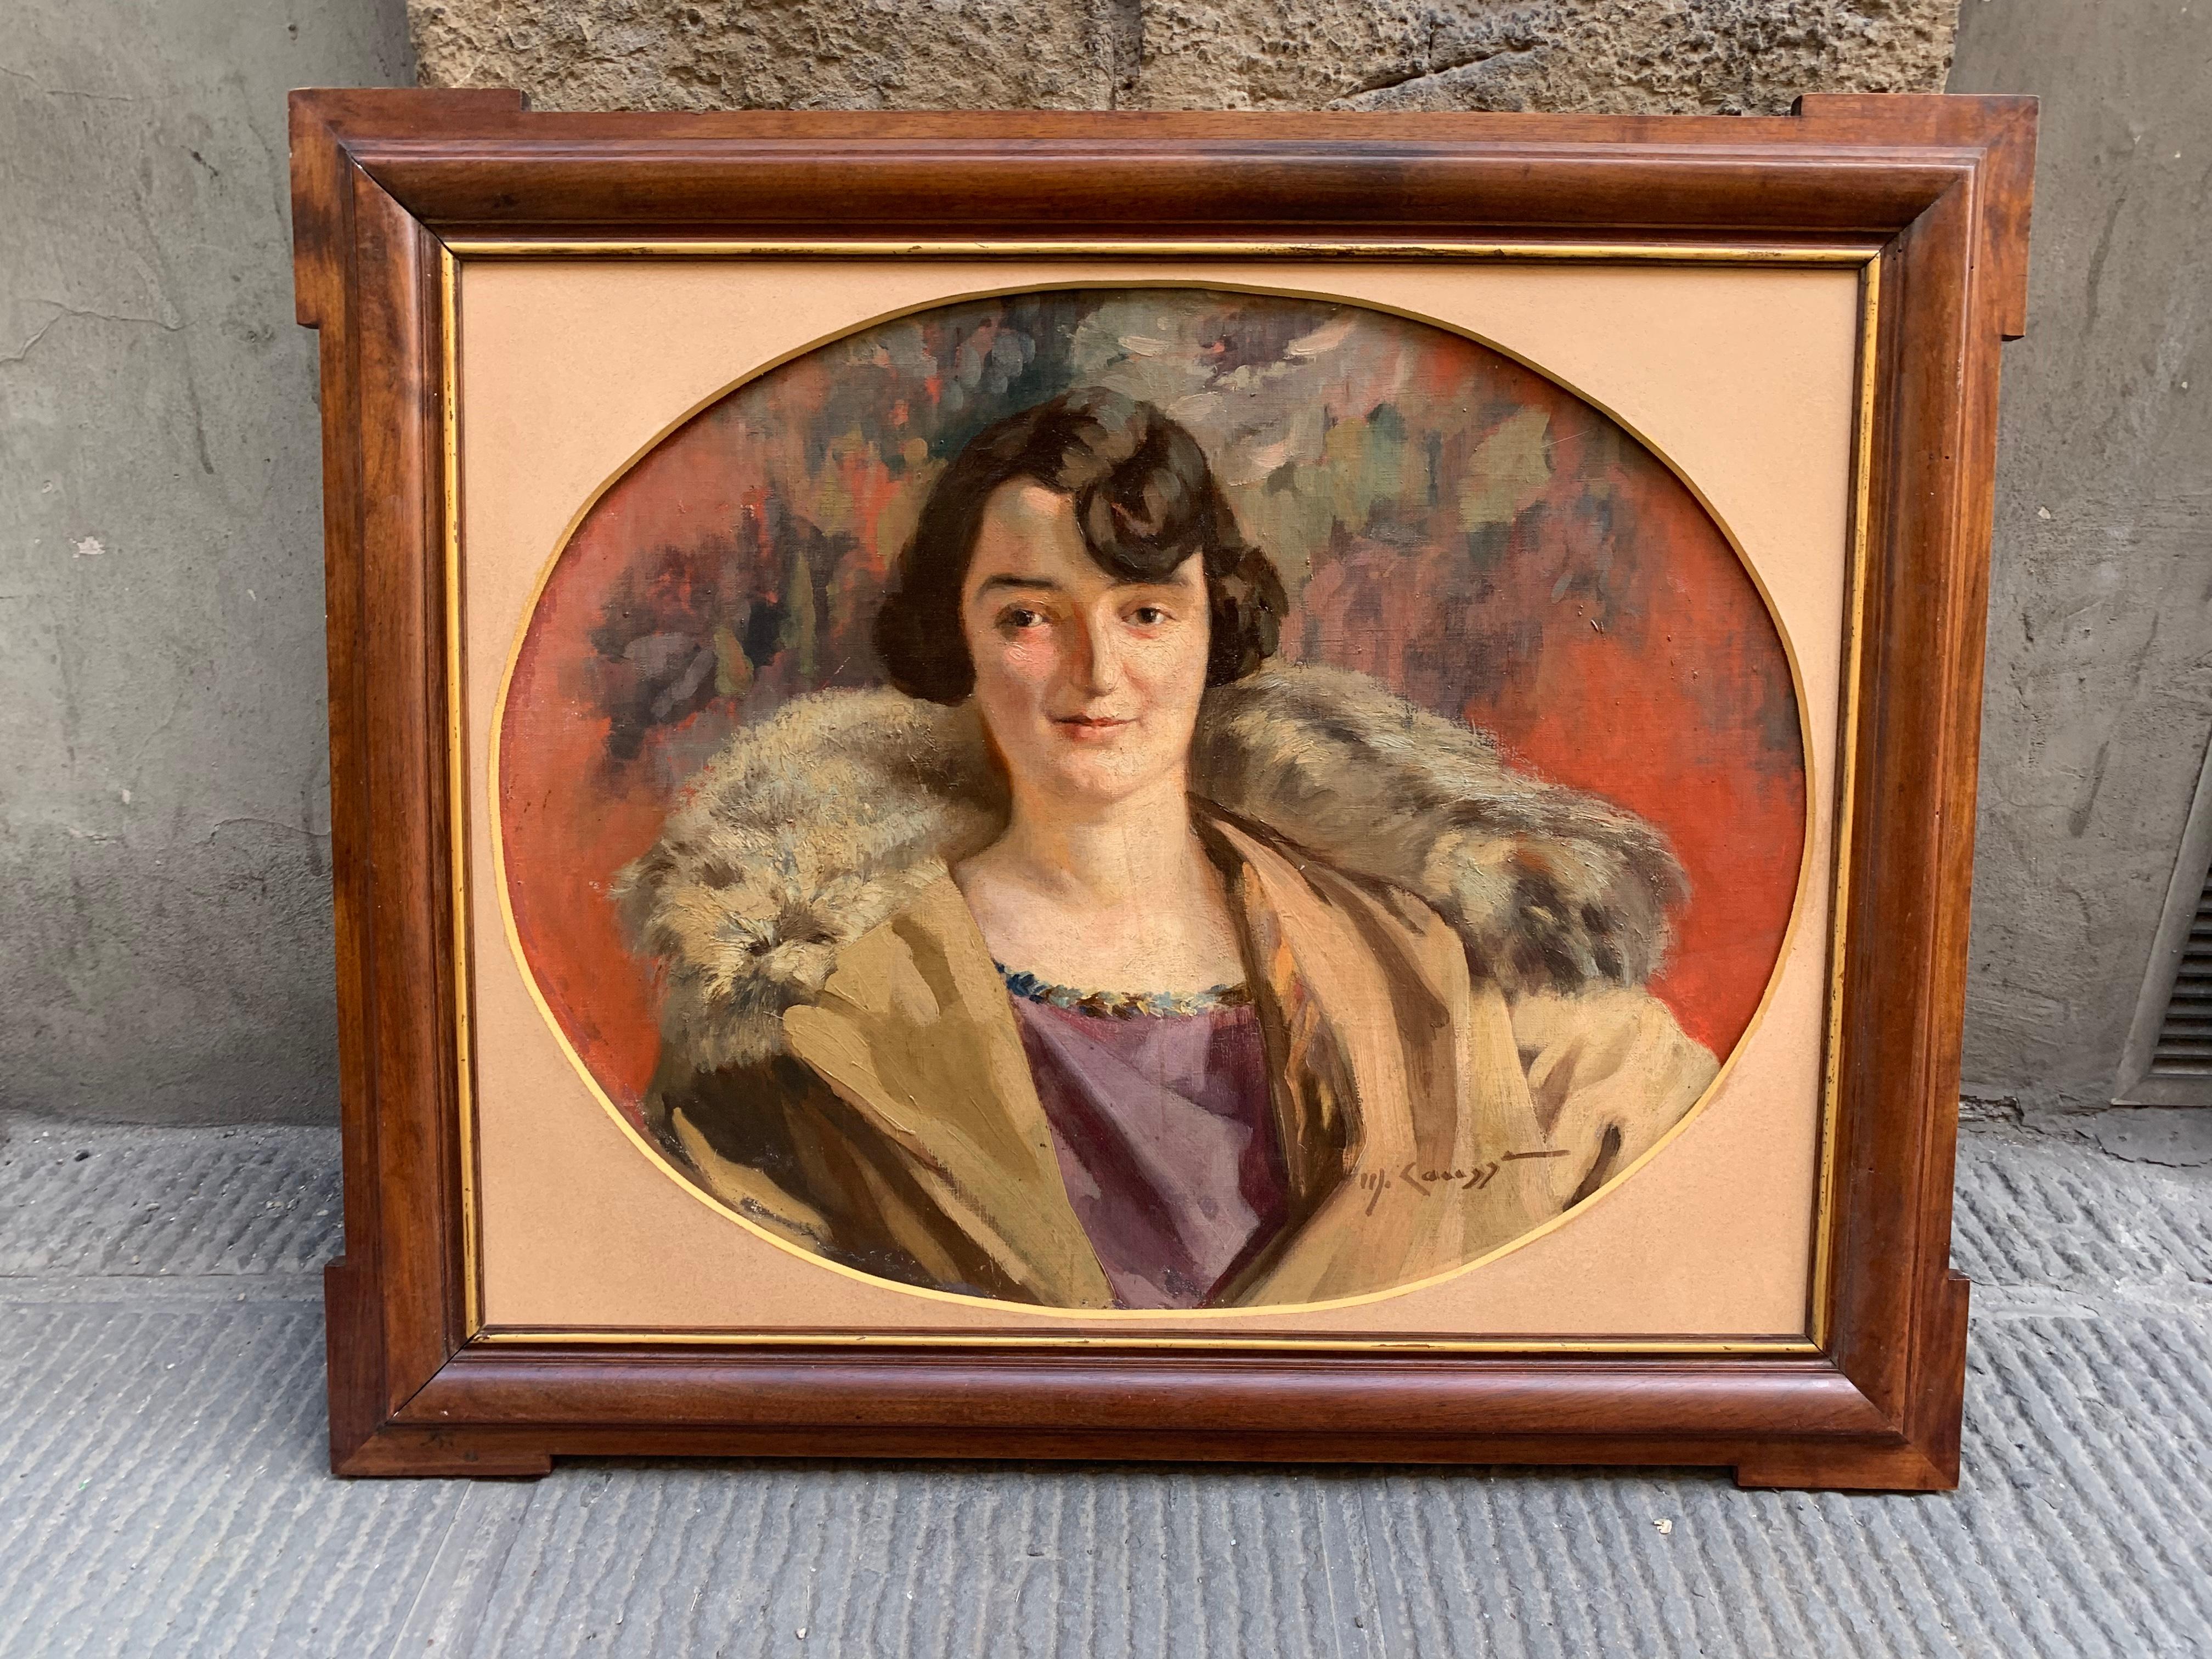 Art Deco ca. 1920. Portrait Of Lady With Bob Cut, Purple Dress And Fur Collar - Painting by Unknown